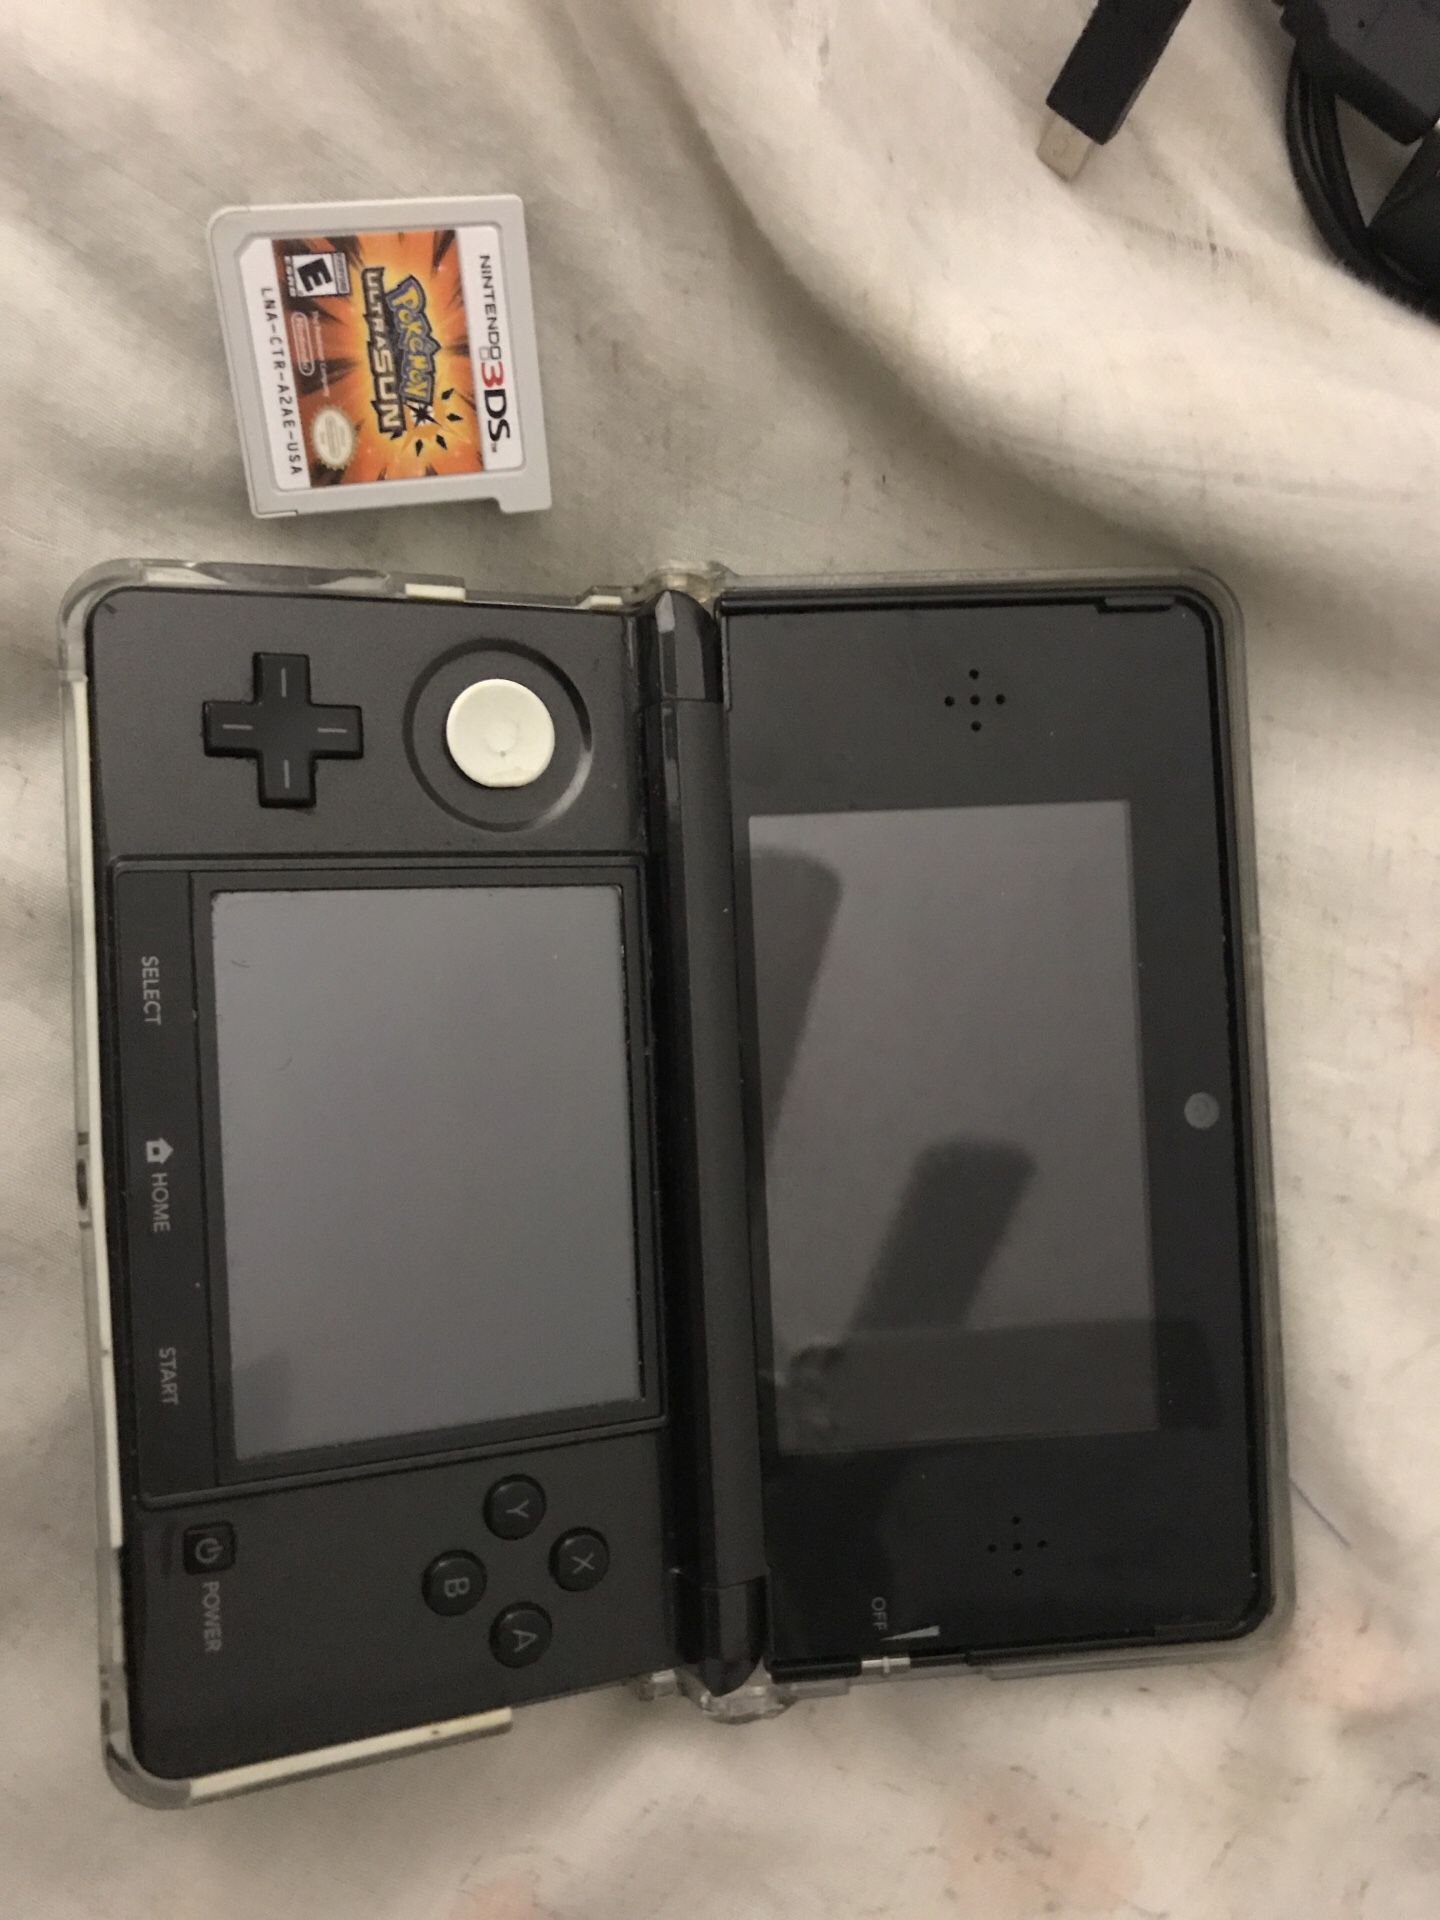 Nintendo 3DS Pokémon ultra sun carrying case and charger.